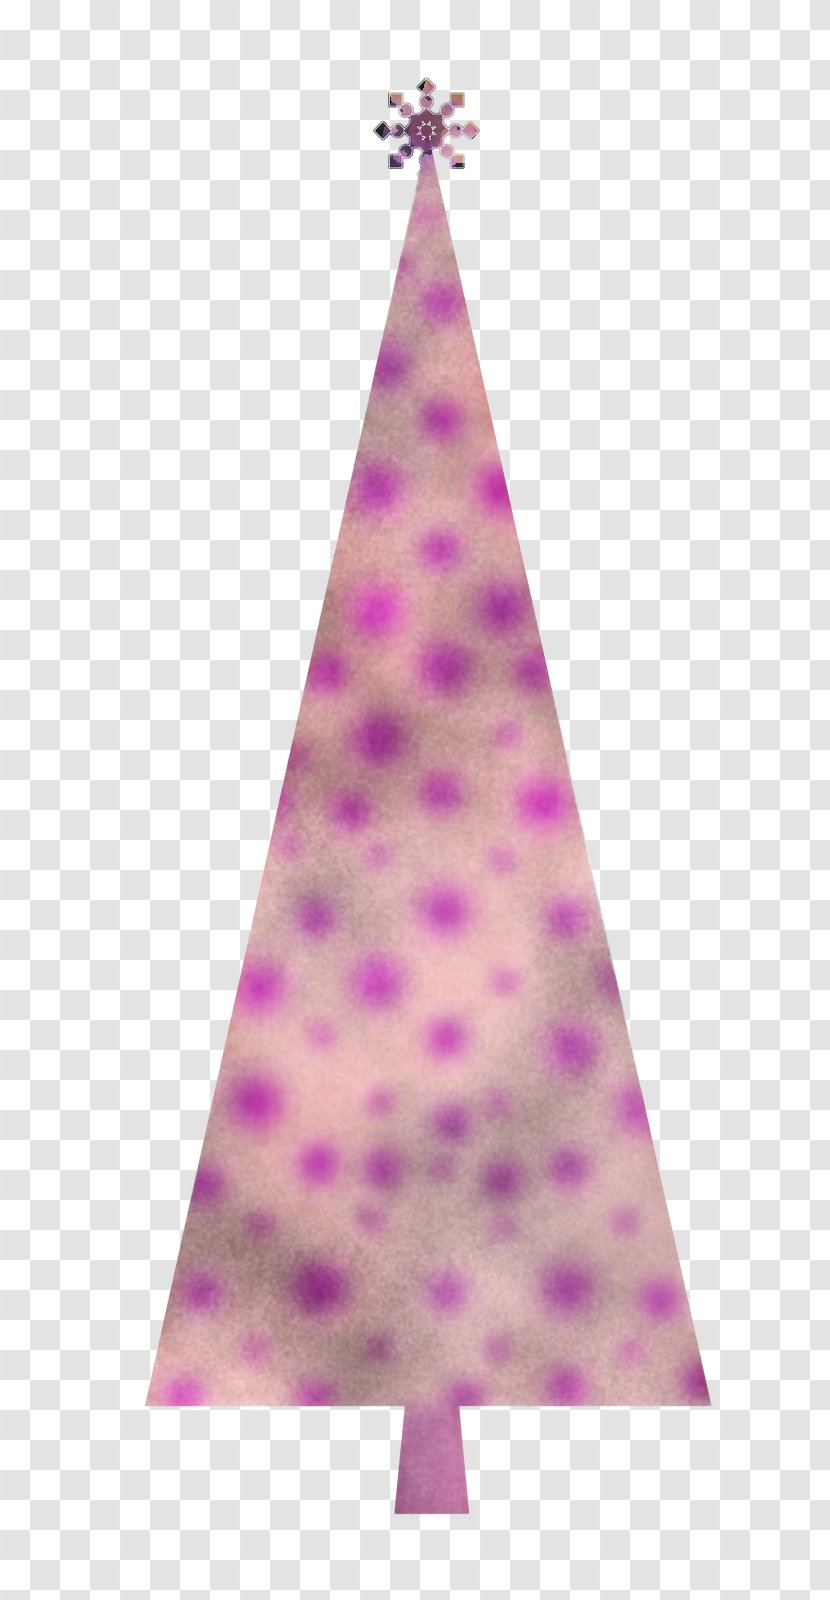 Lavender - Pink - Cone Triangle Transparent PNG